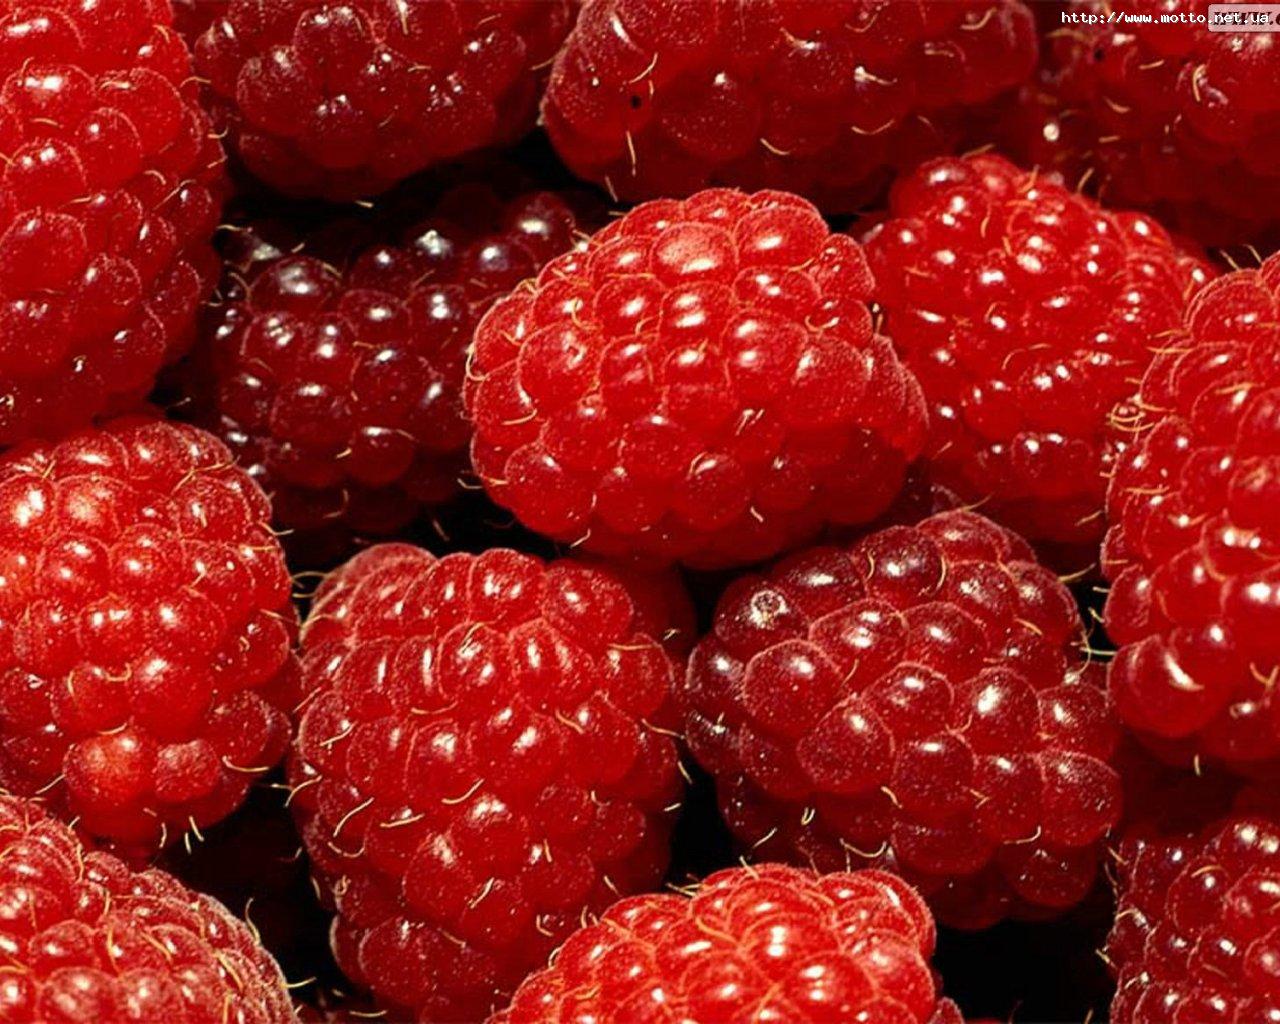 What happens if you eat raspberries everyday?